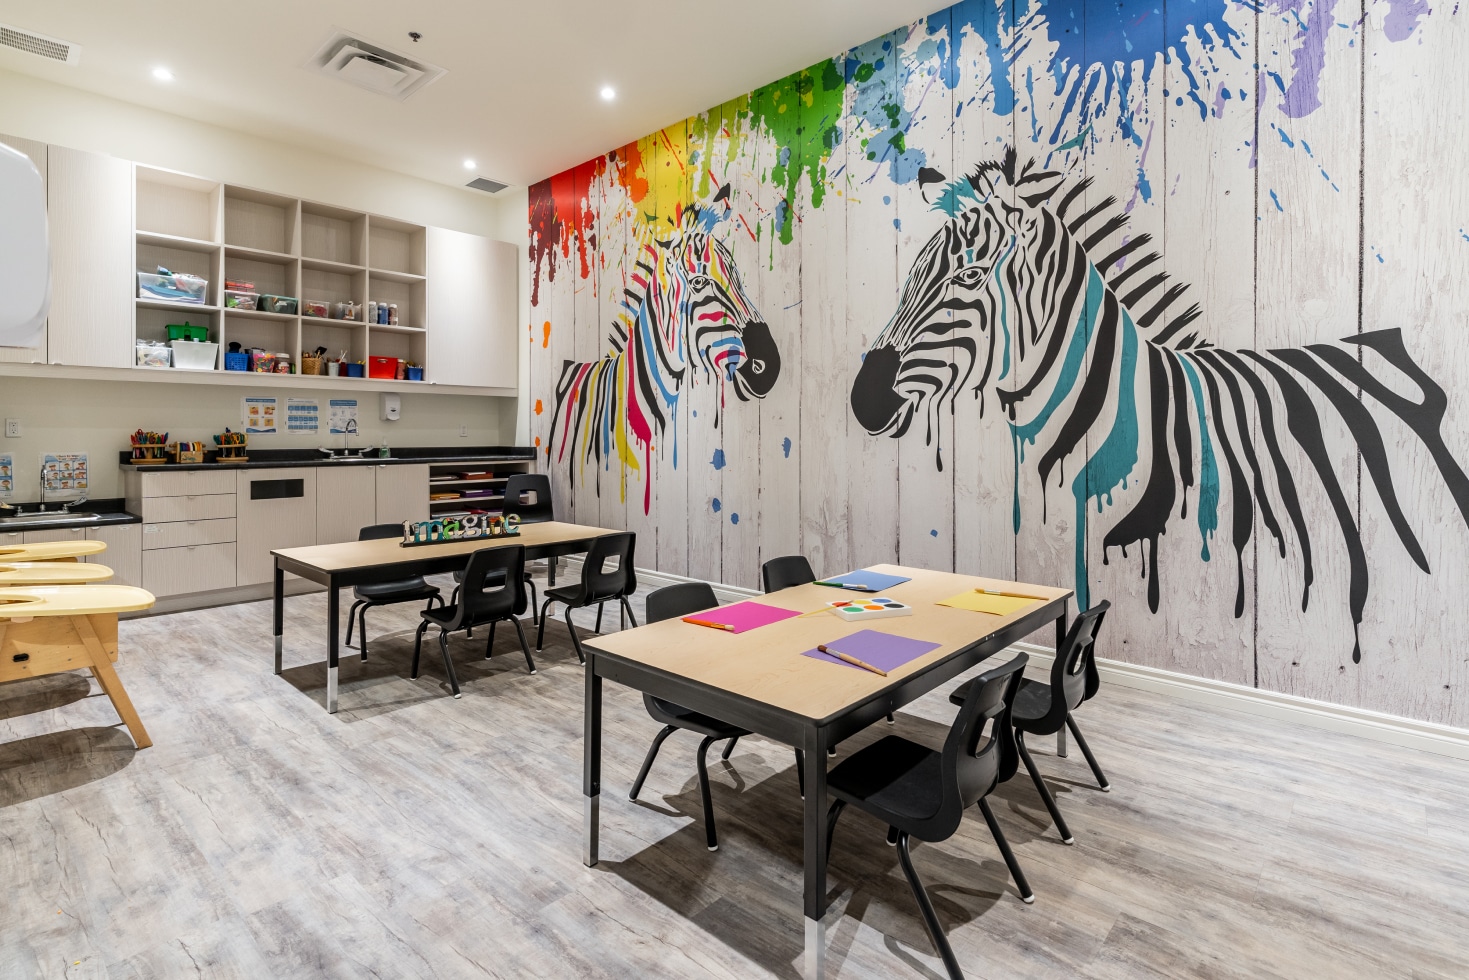 An early learning centre with zebras painted on the wall in the children's room.